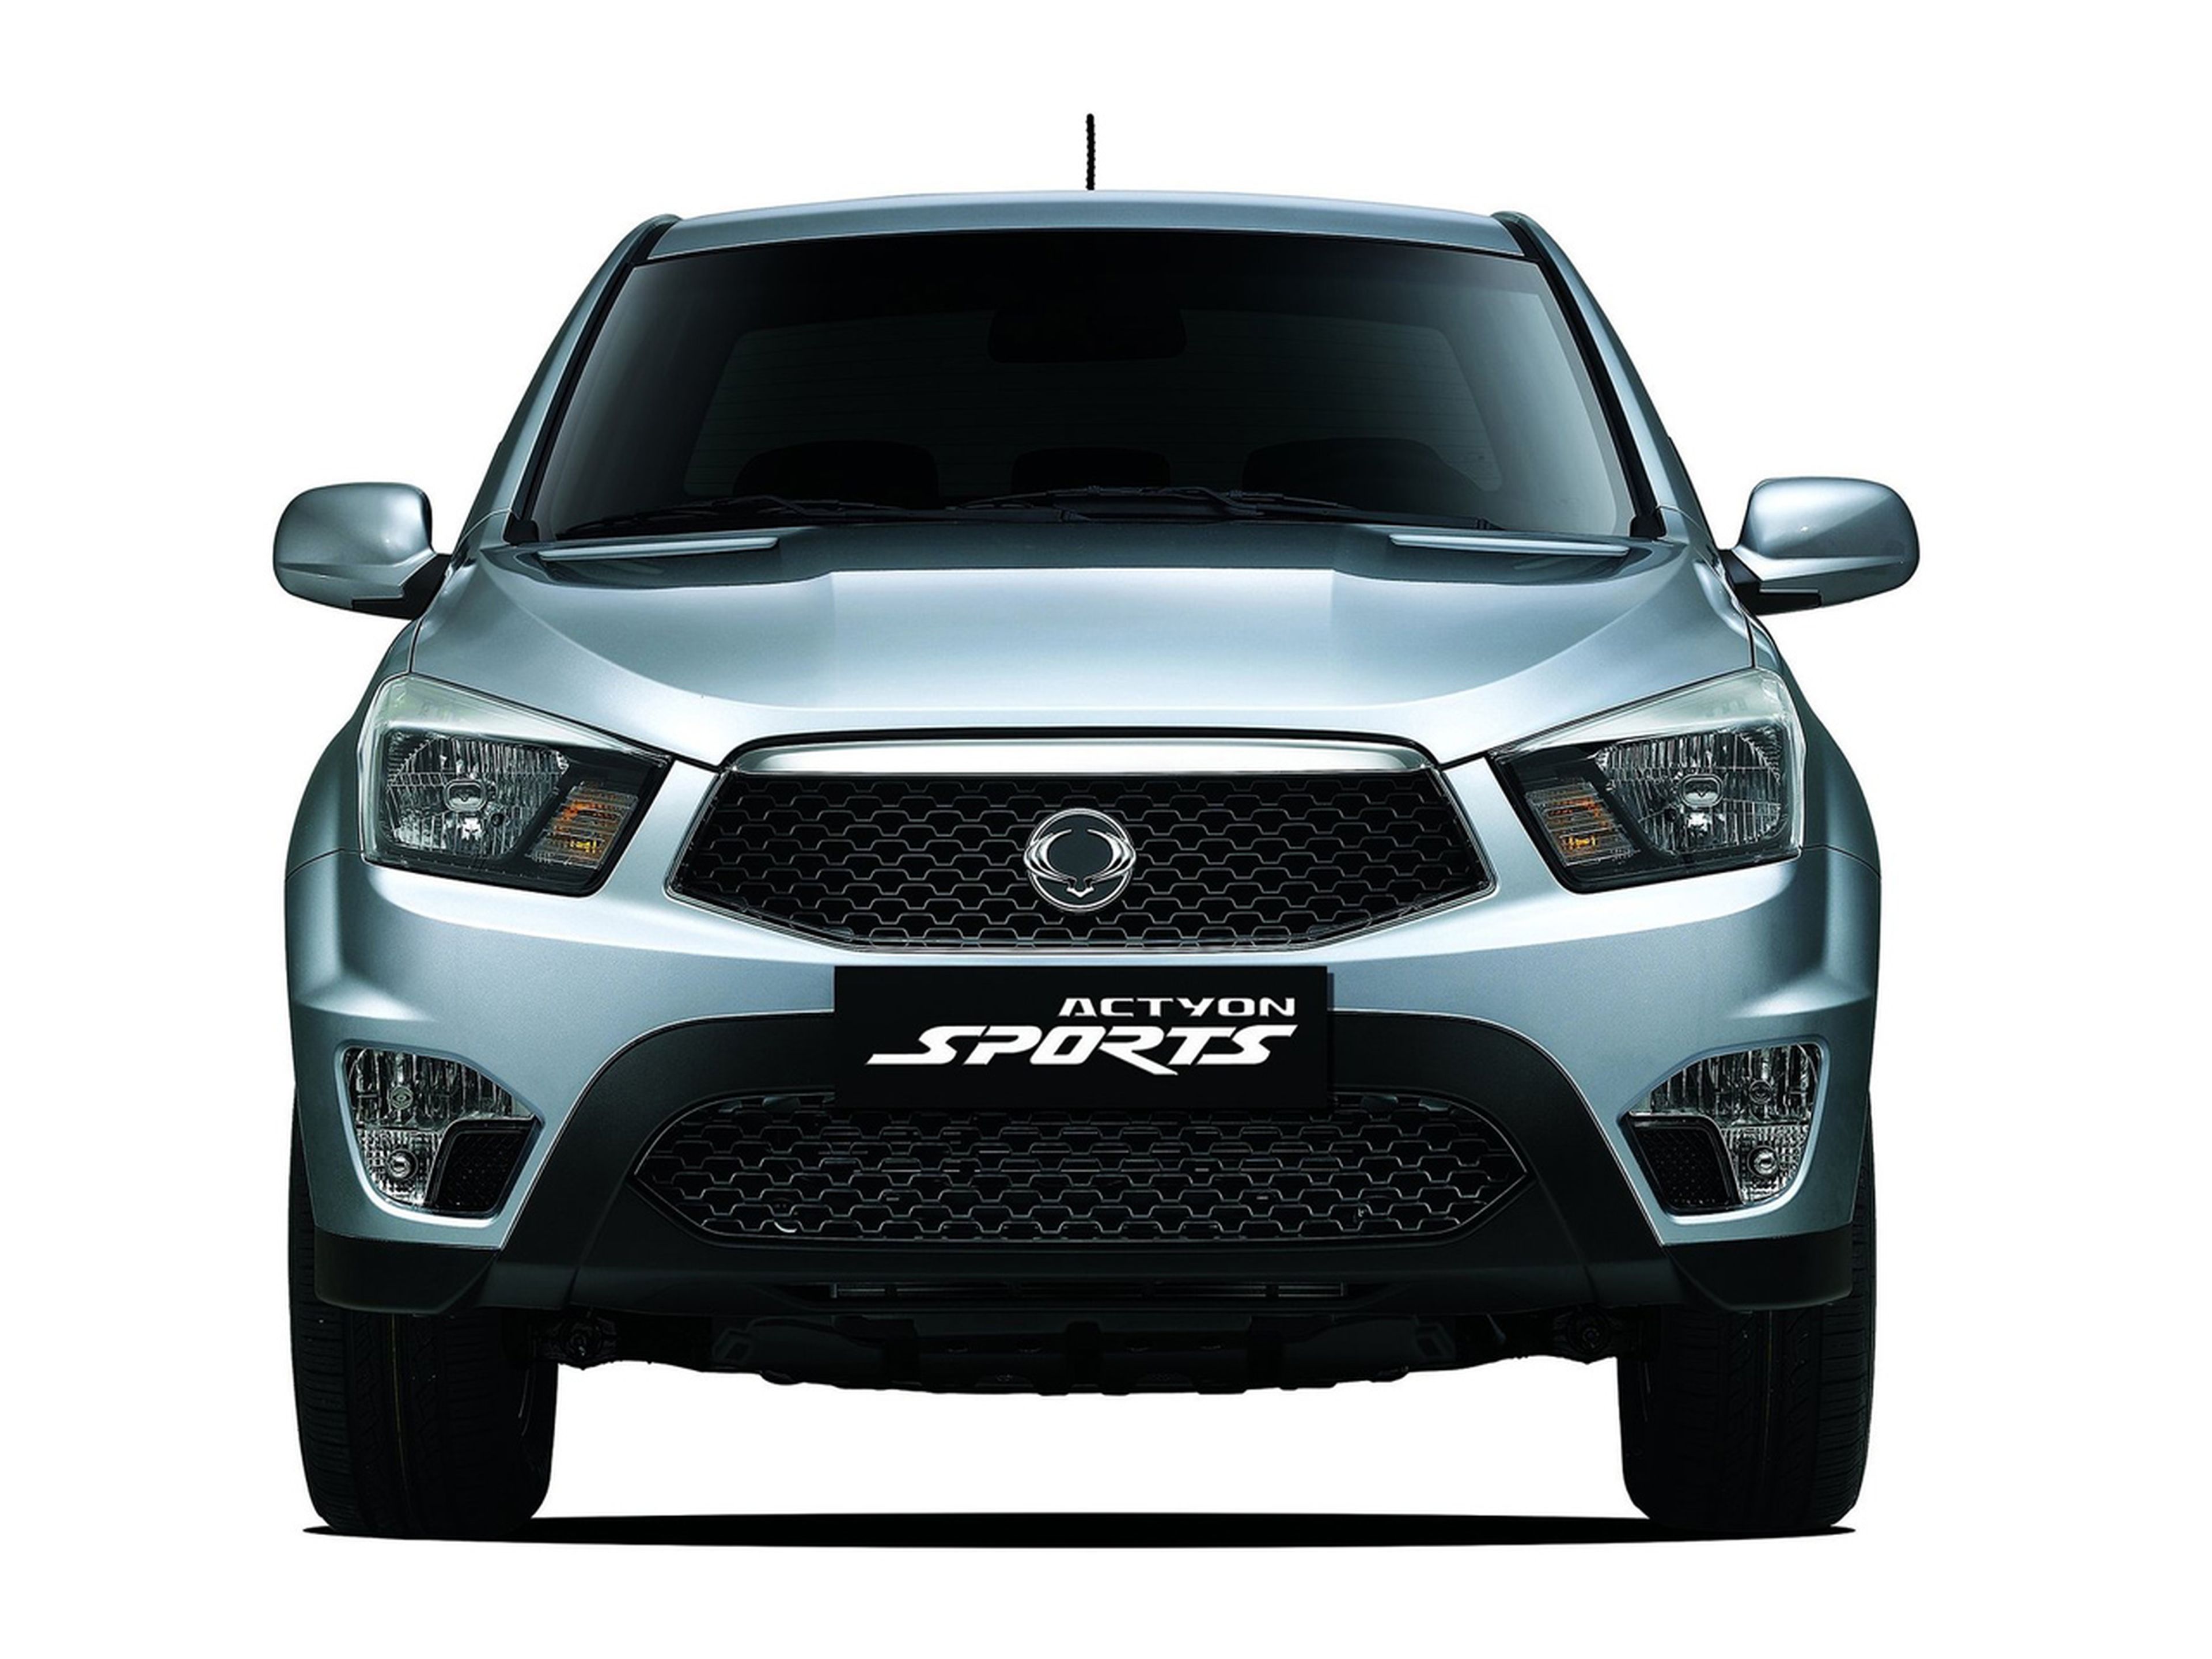 SsangYong-ActyonSports_2013_C01